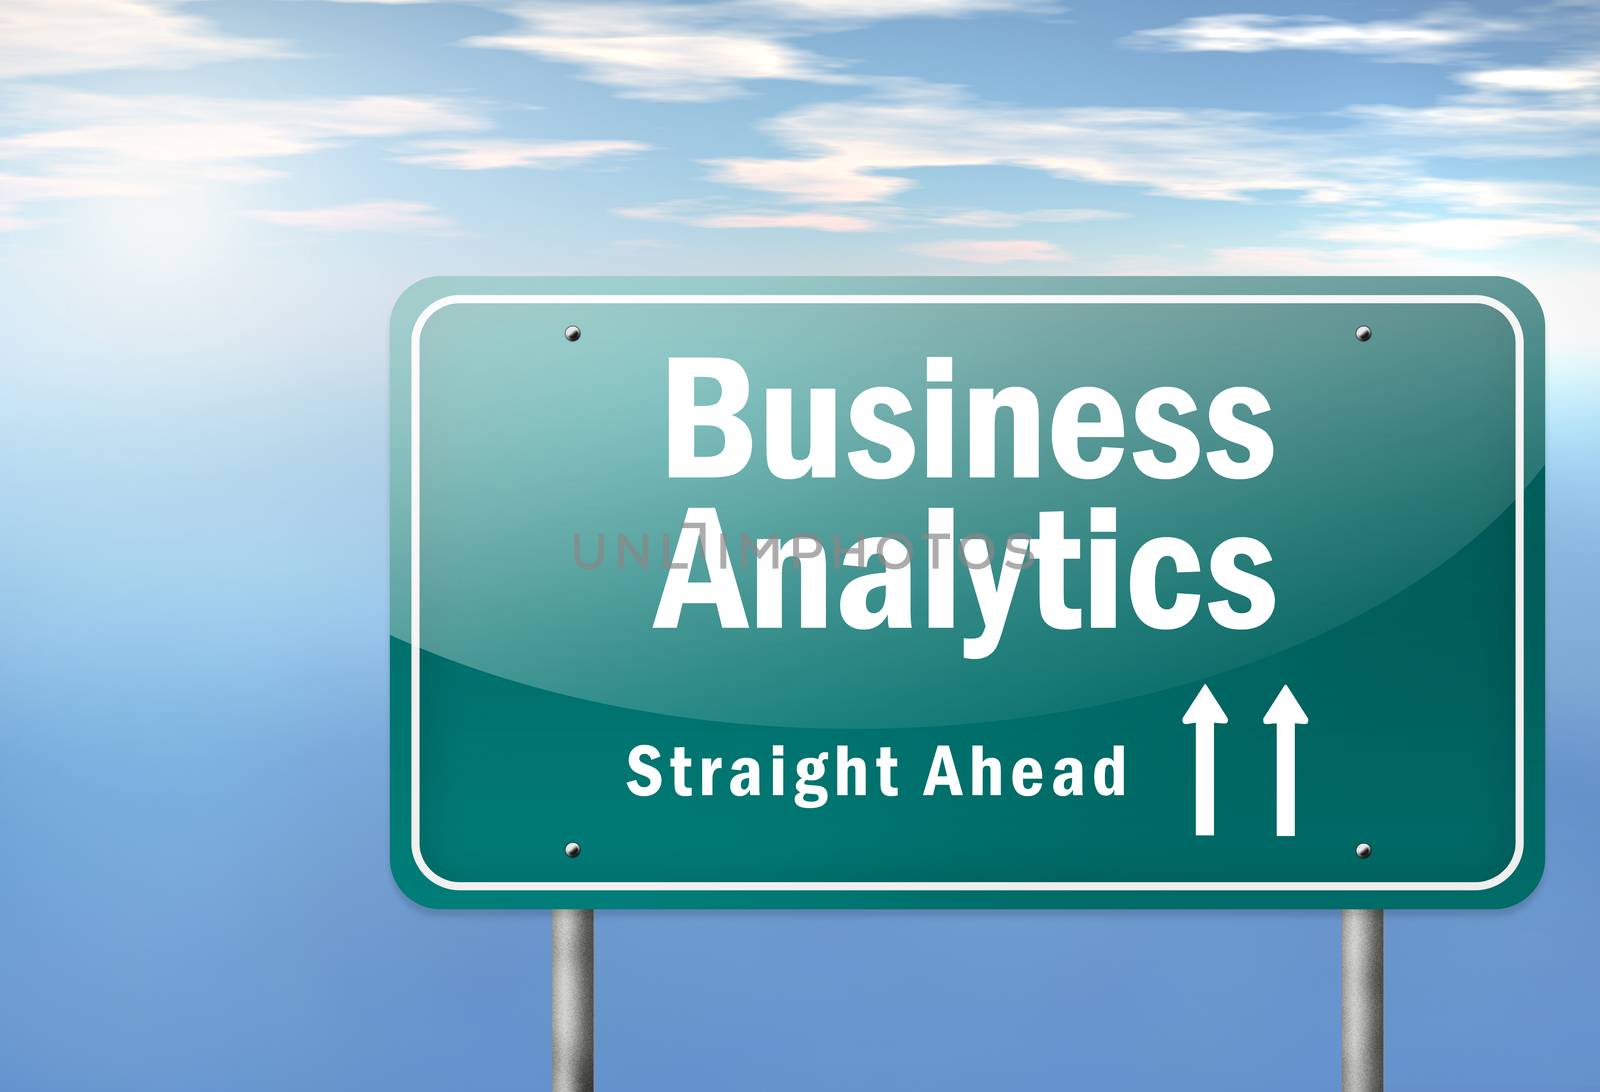 Highway Signpost "Business Analytics" by mindscanner